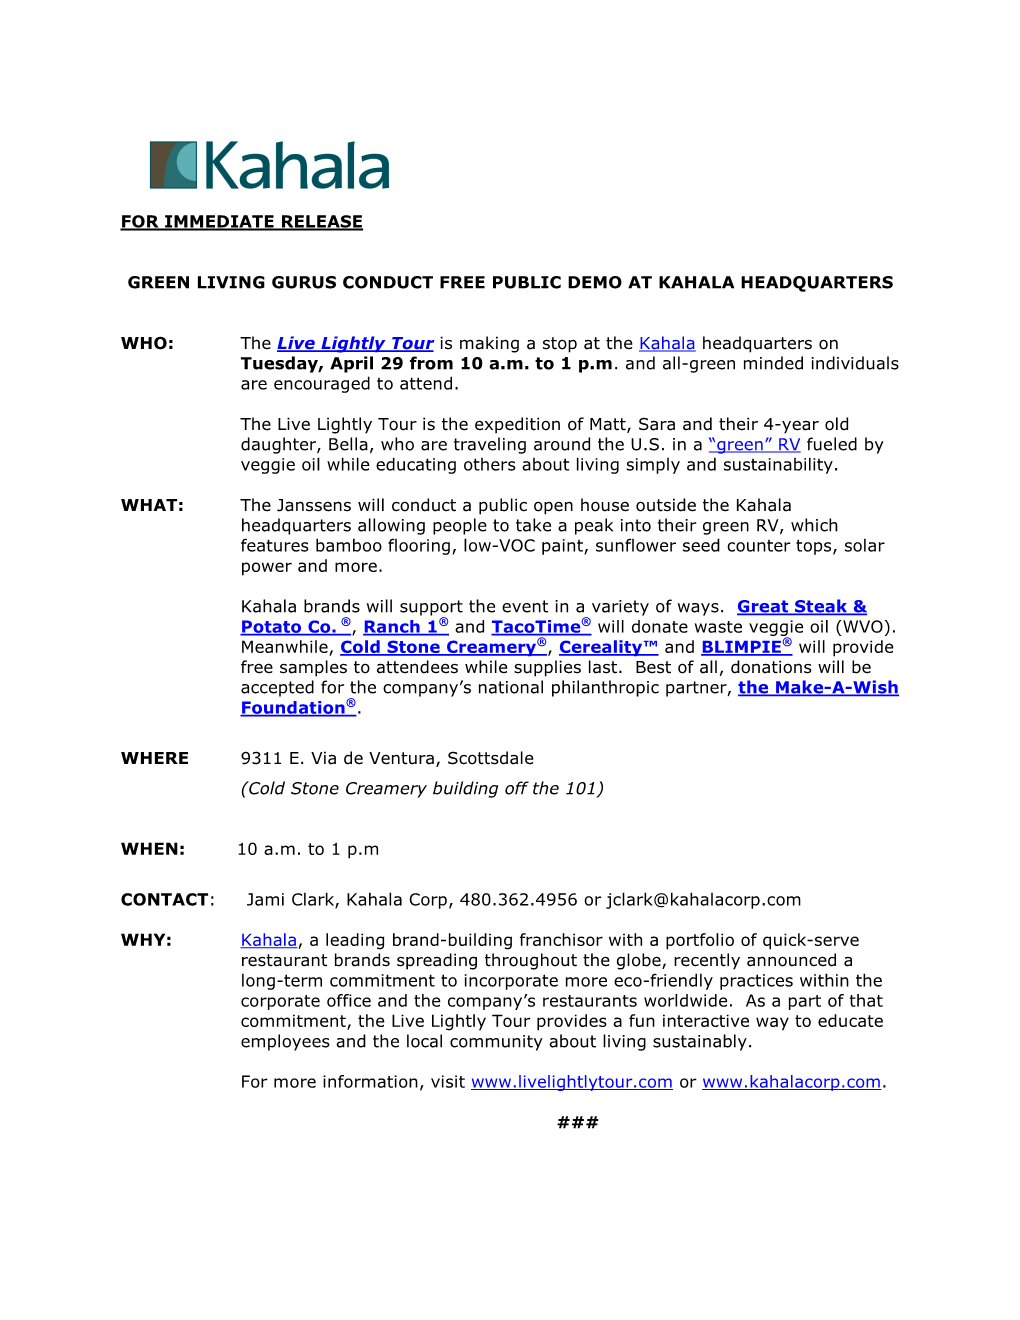 The Live Lightly Tour Is Making a Stop at the Kahala Headquarters on Tuesday, April 29 from 10 A.M